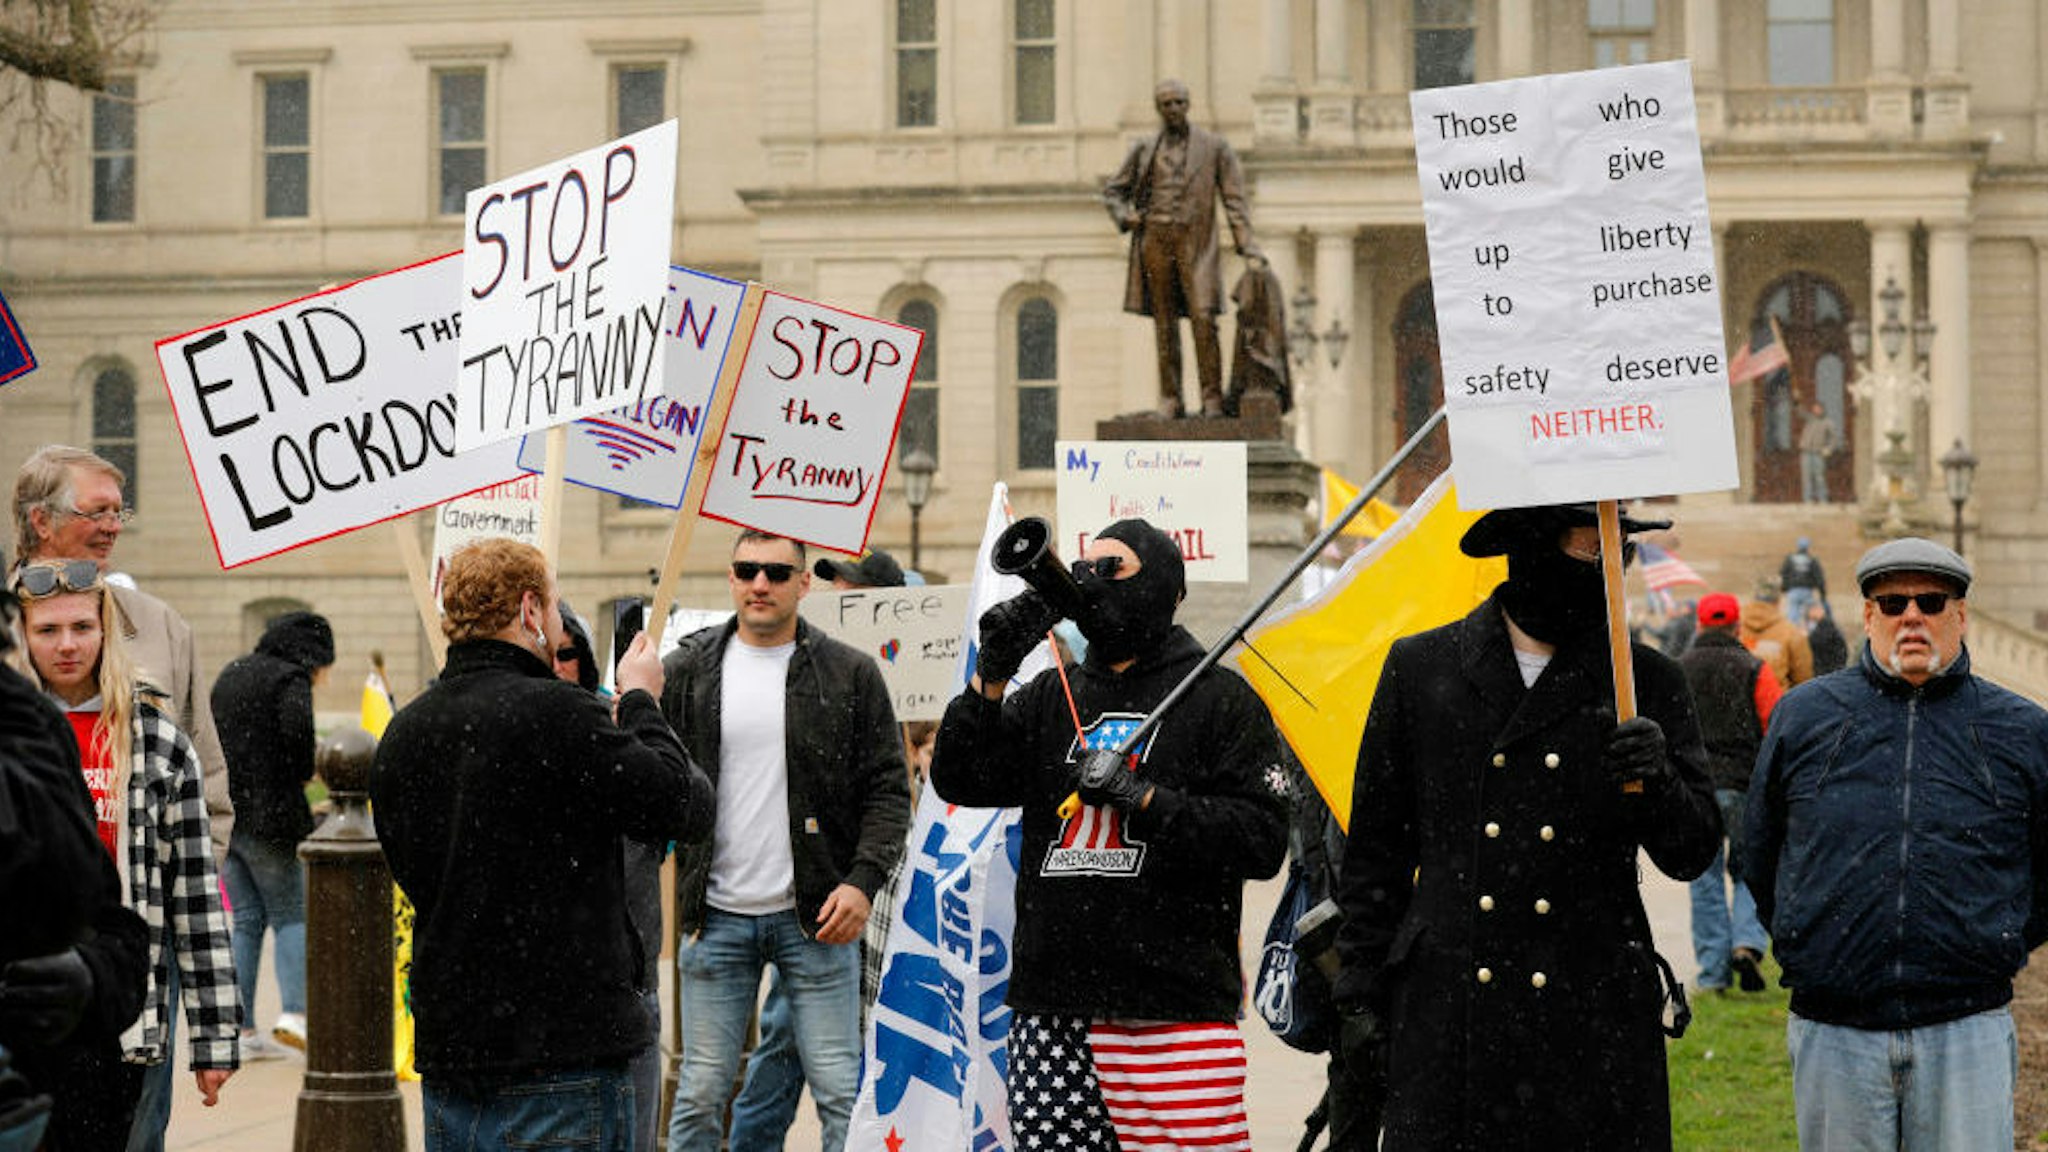 A protest organized by "Michiganders Against Excessive Quarantine" gathers around the Michigan State Capitol in Lansing, Michigan on April 15, 2020. - The group is upset with Michigan Governor Gretchen Whitmer's(D-MI) expanded the states stay-at-home order to contain the spread of the coronavirus. (Photo by JEFF KOWALSKY / AFP) (Photo by JEFF KOWALSKY/AFP via Getty Images)